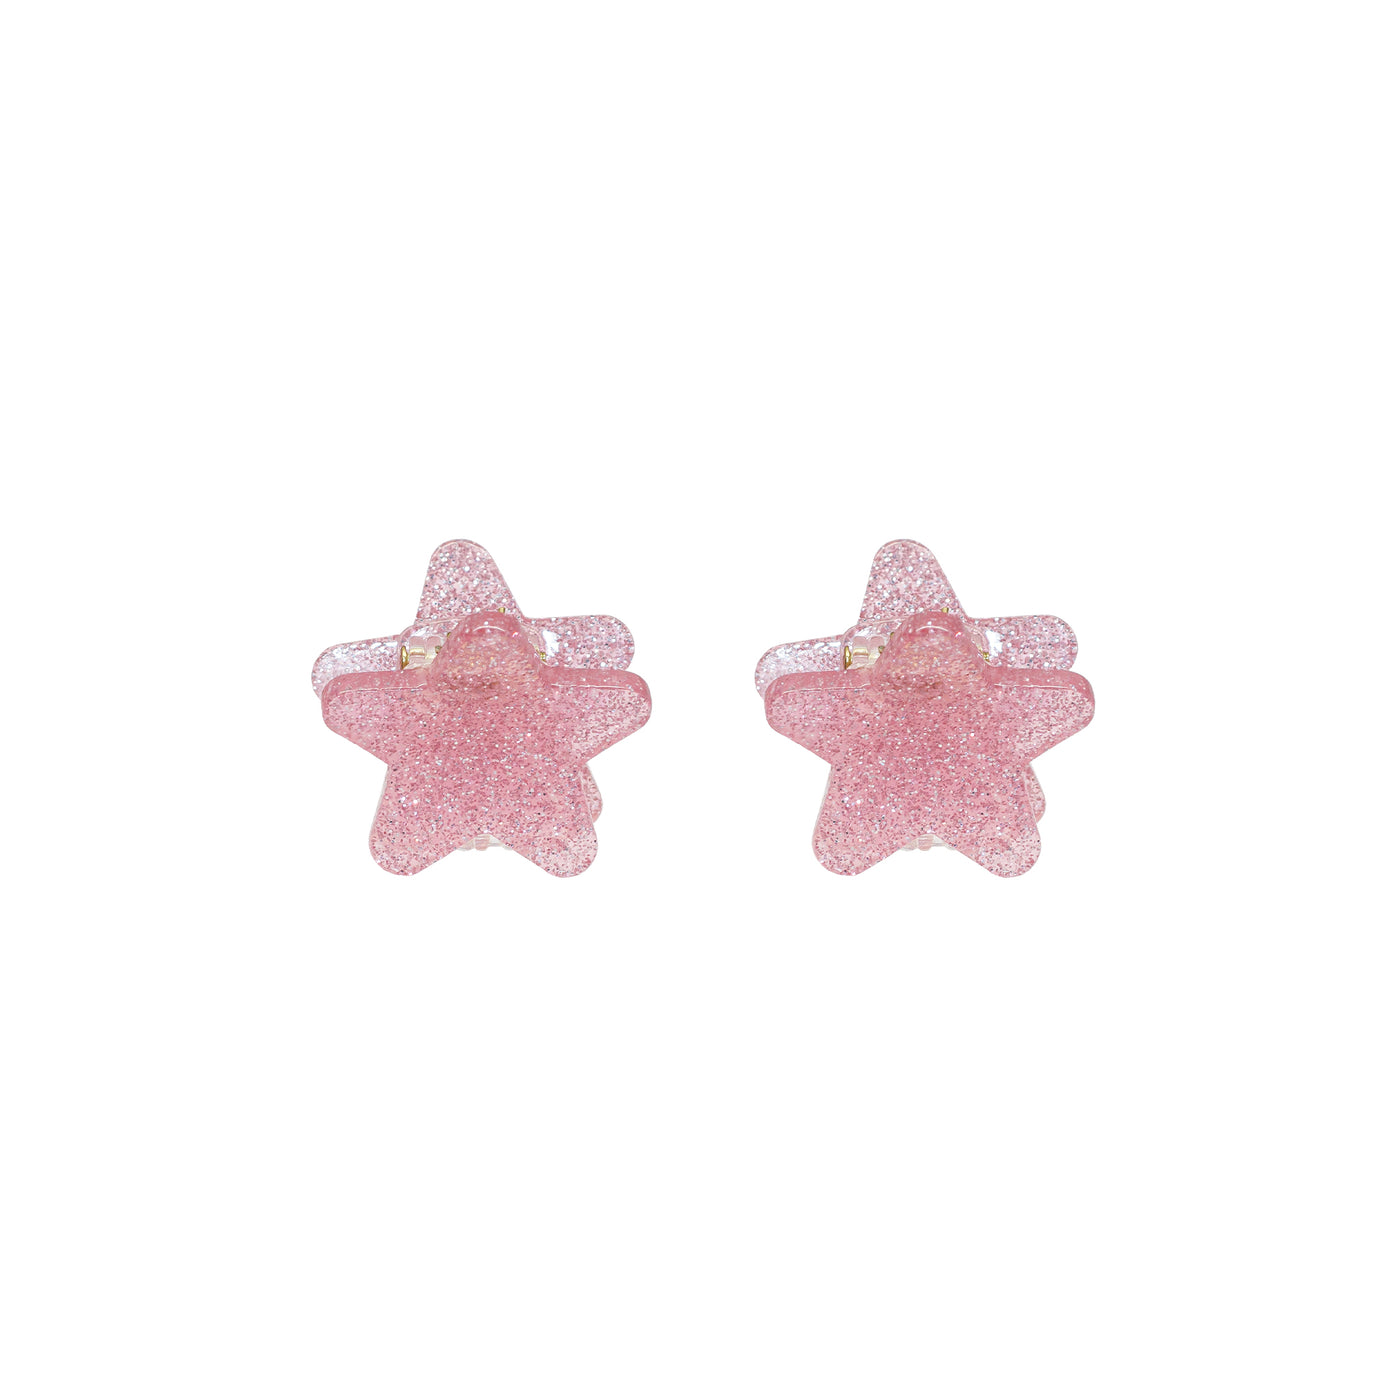 Baby Star Clip Set in Pink Sand